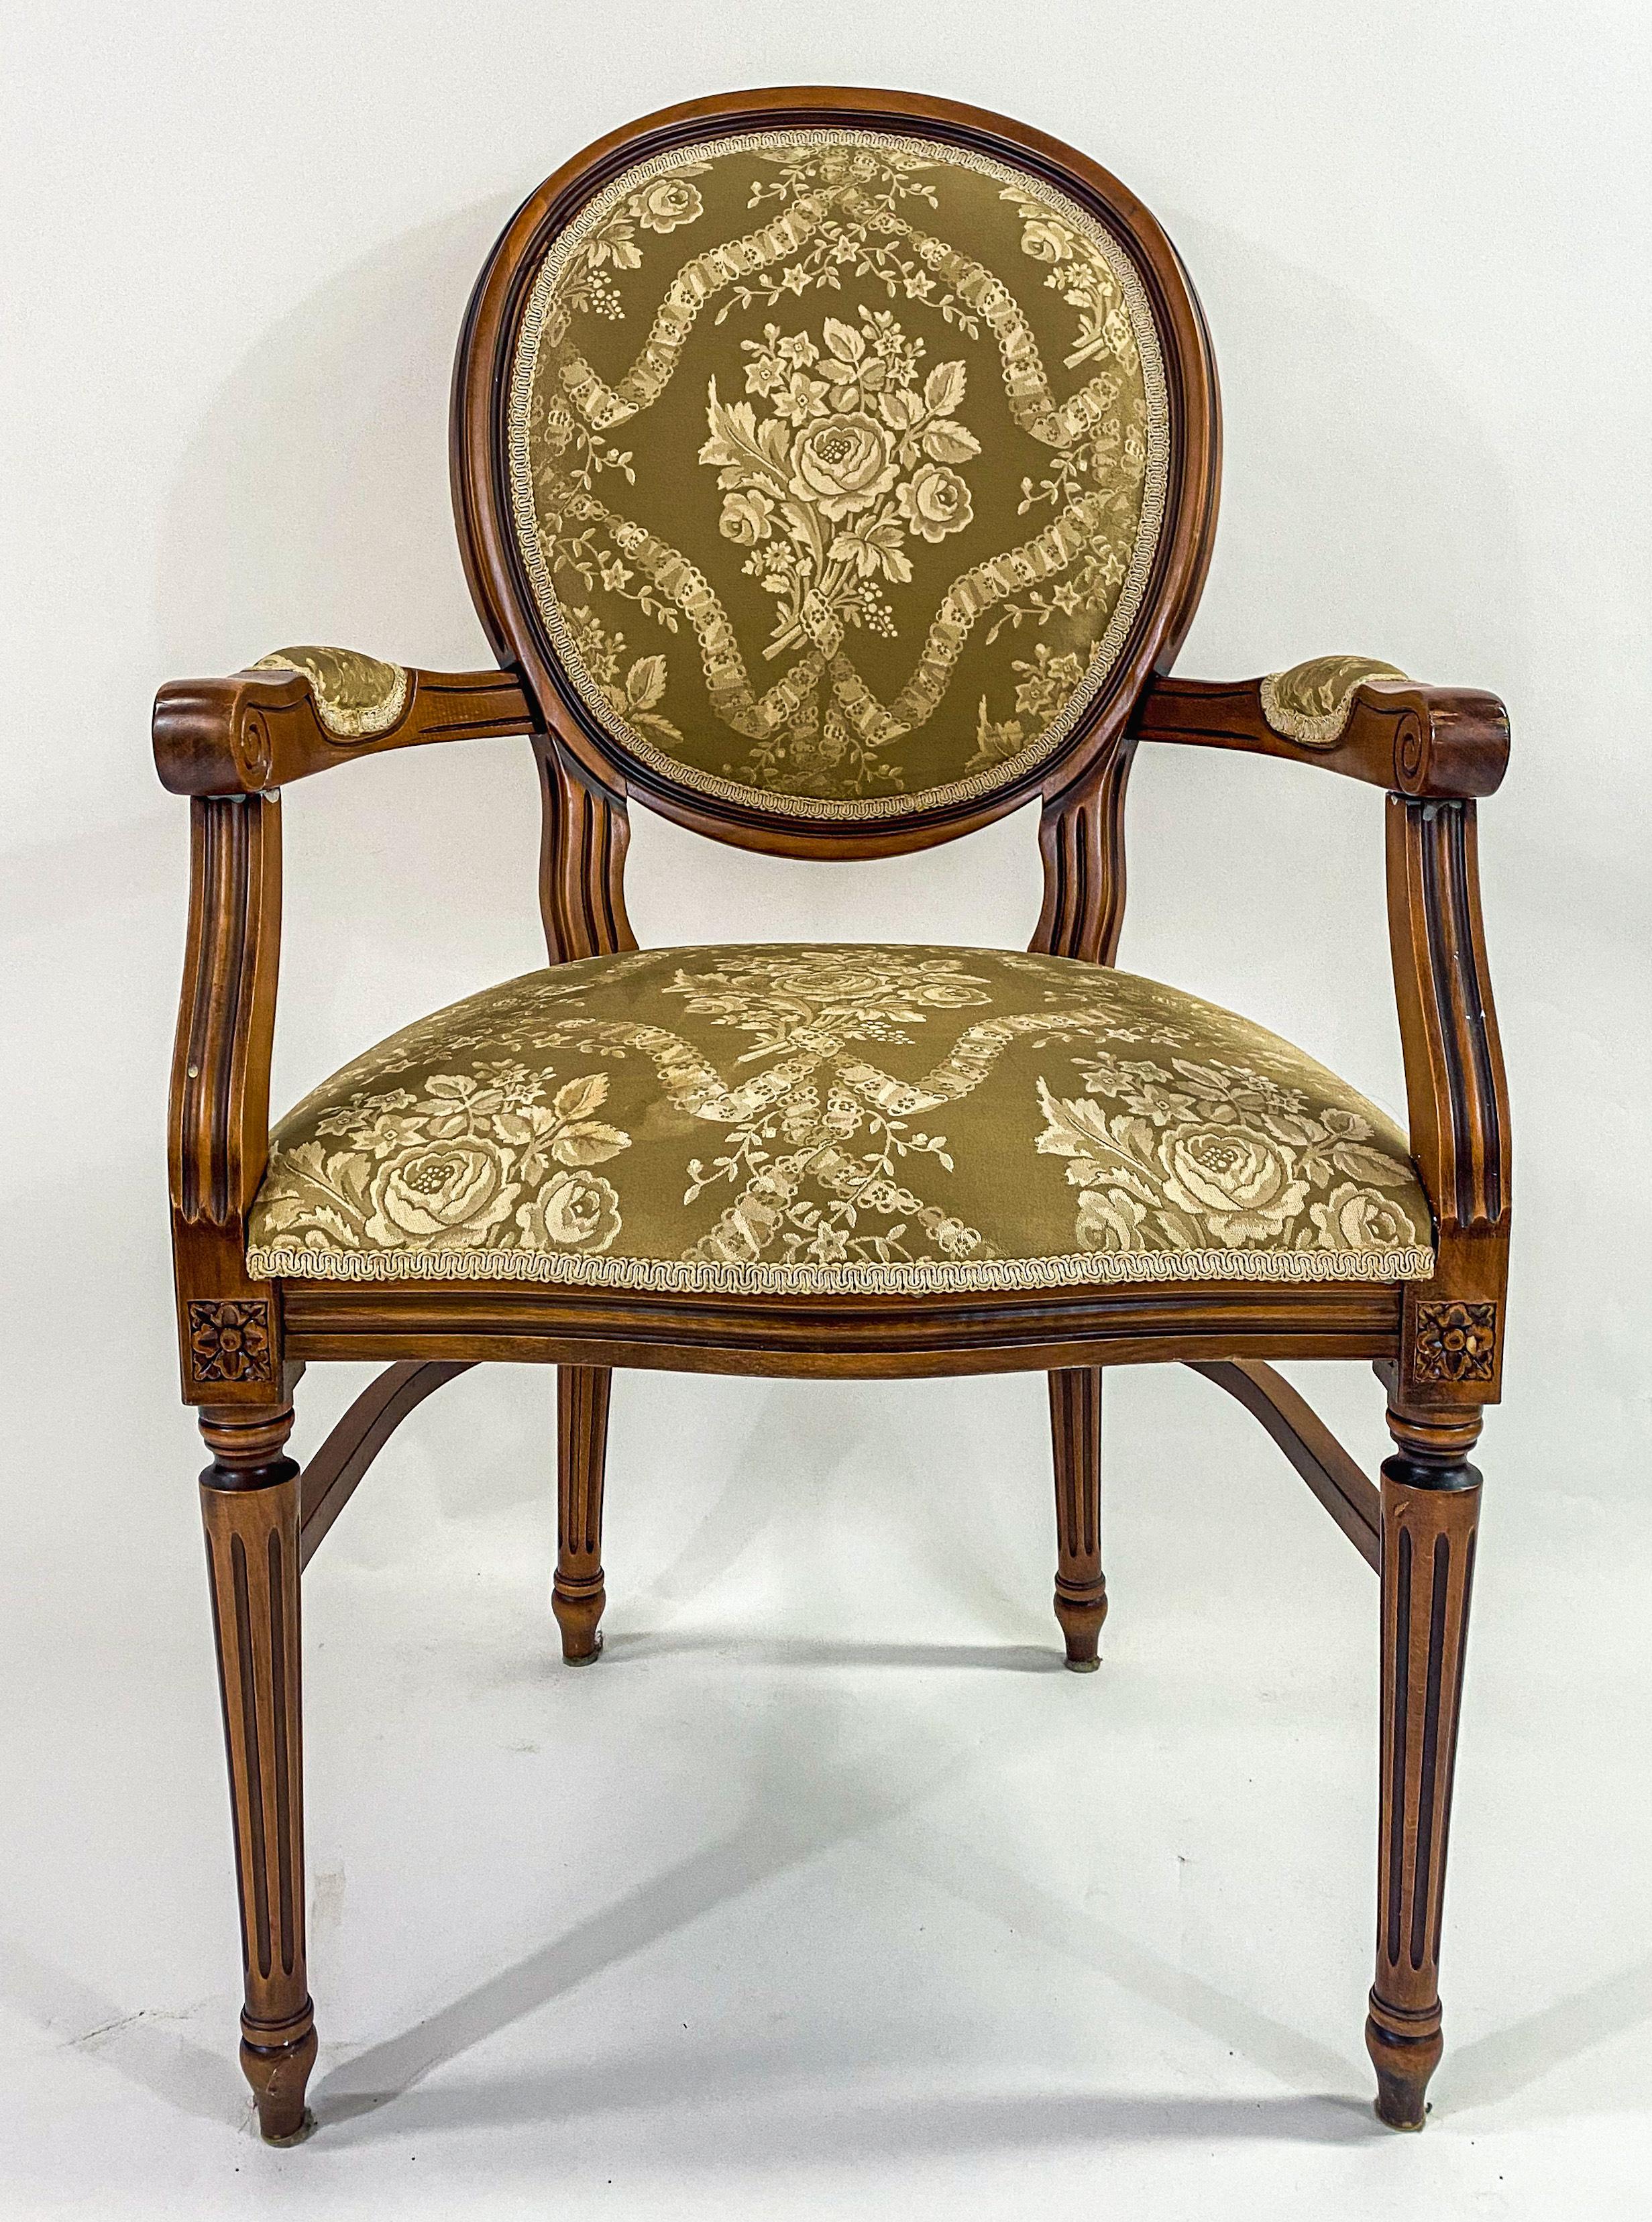 20th Century French Louis XVI Style Bergere Chair with Green Floral Upholstery, a Pair